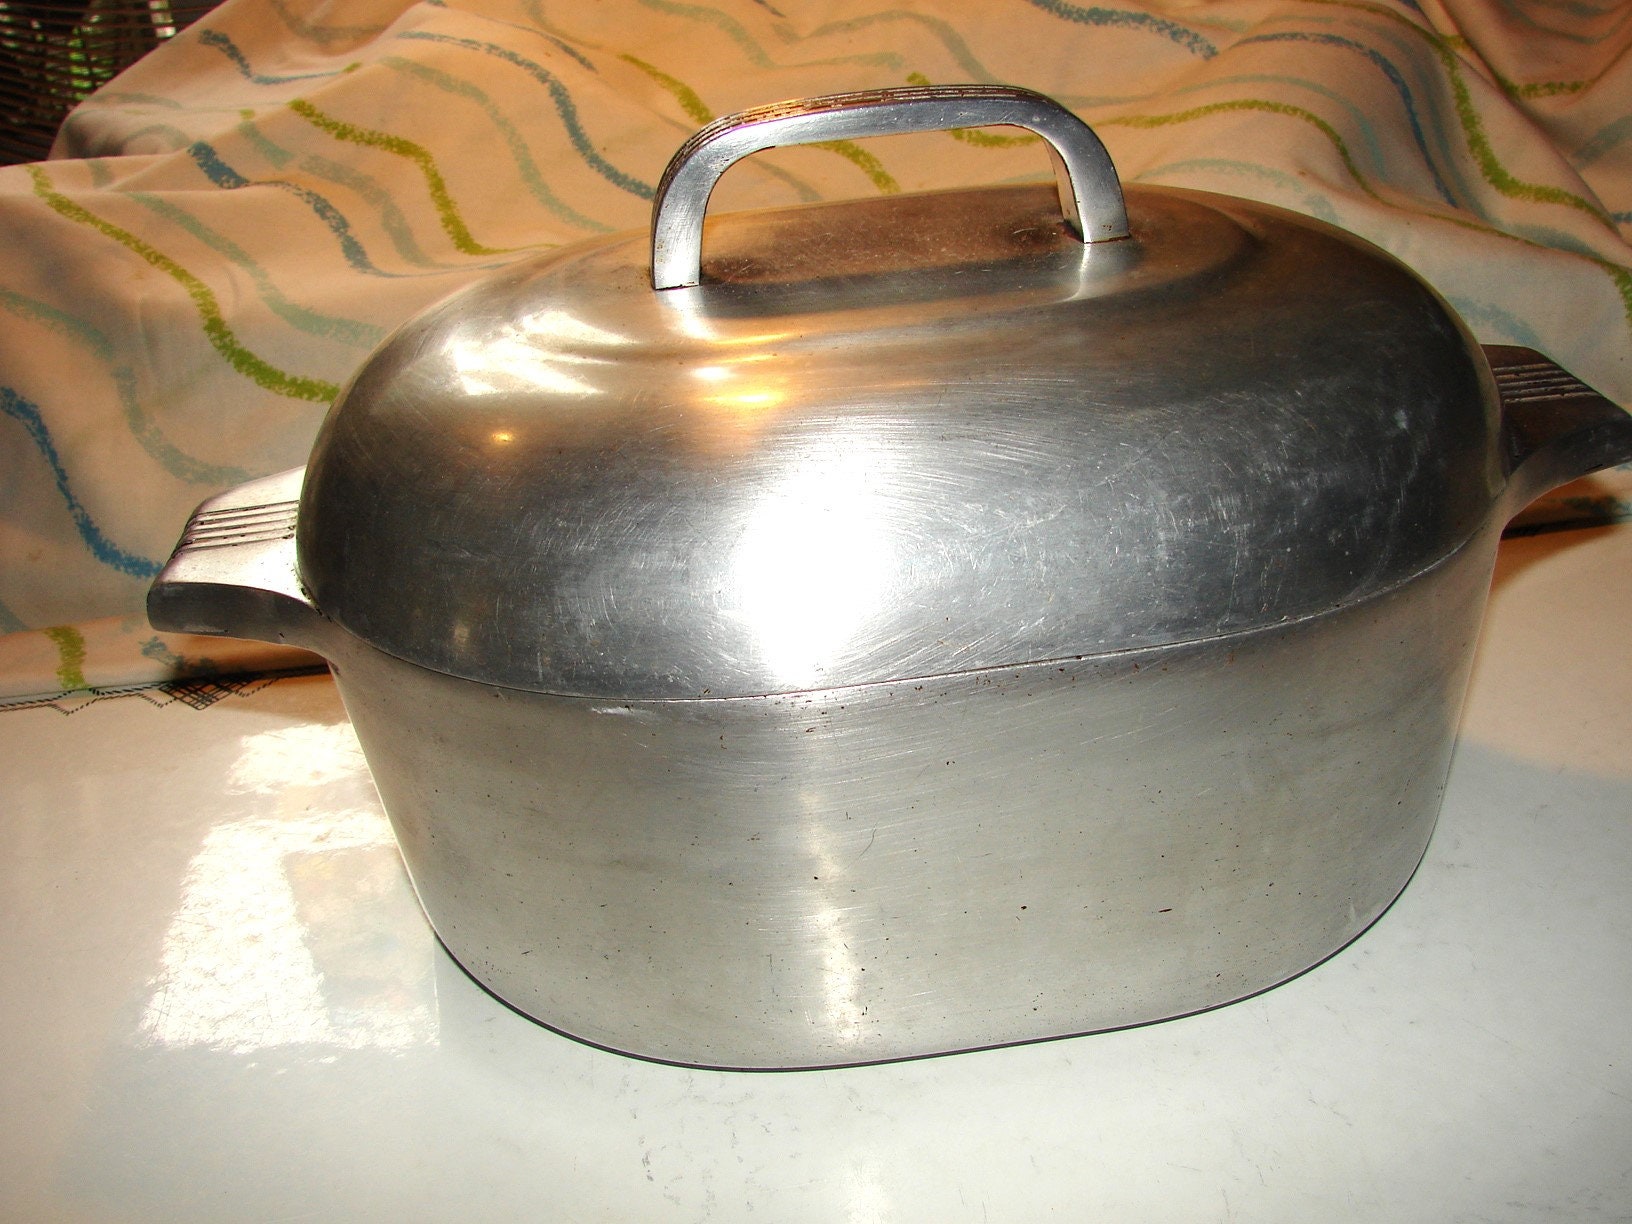 Beautiful Oval Aluminum Roaster Set by Wagner Ware Magnalite